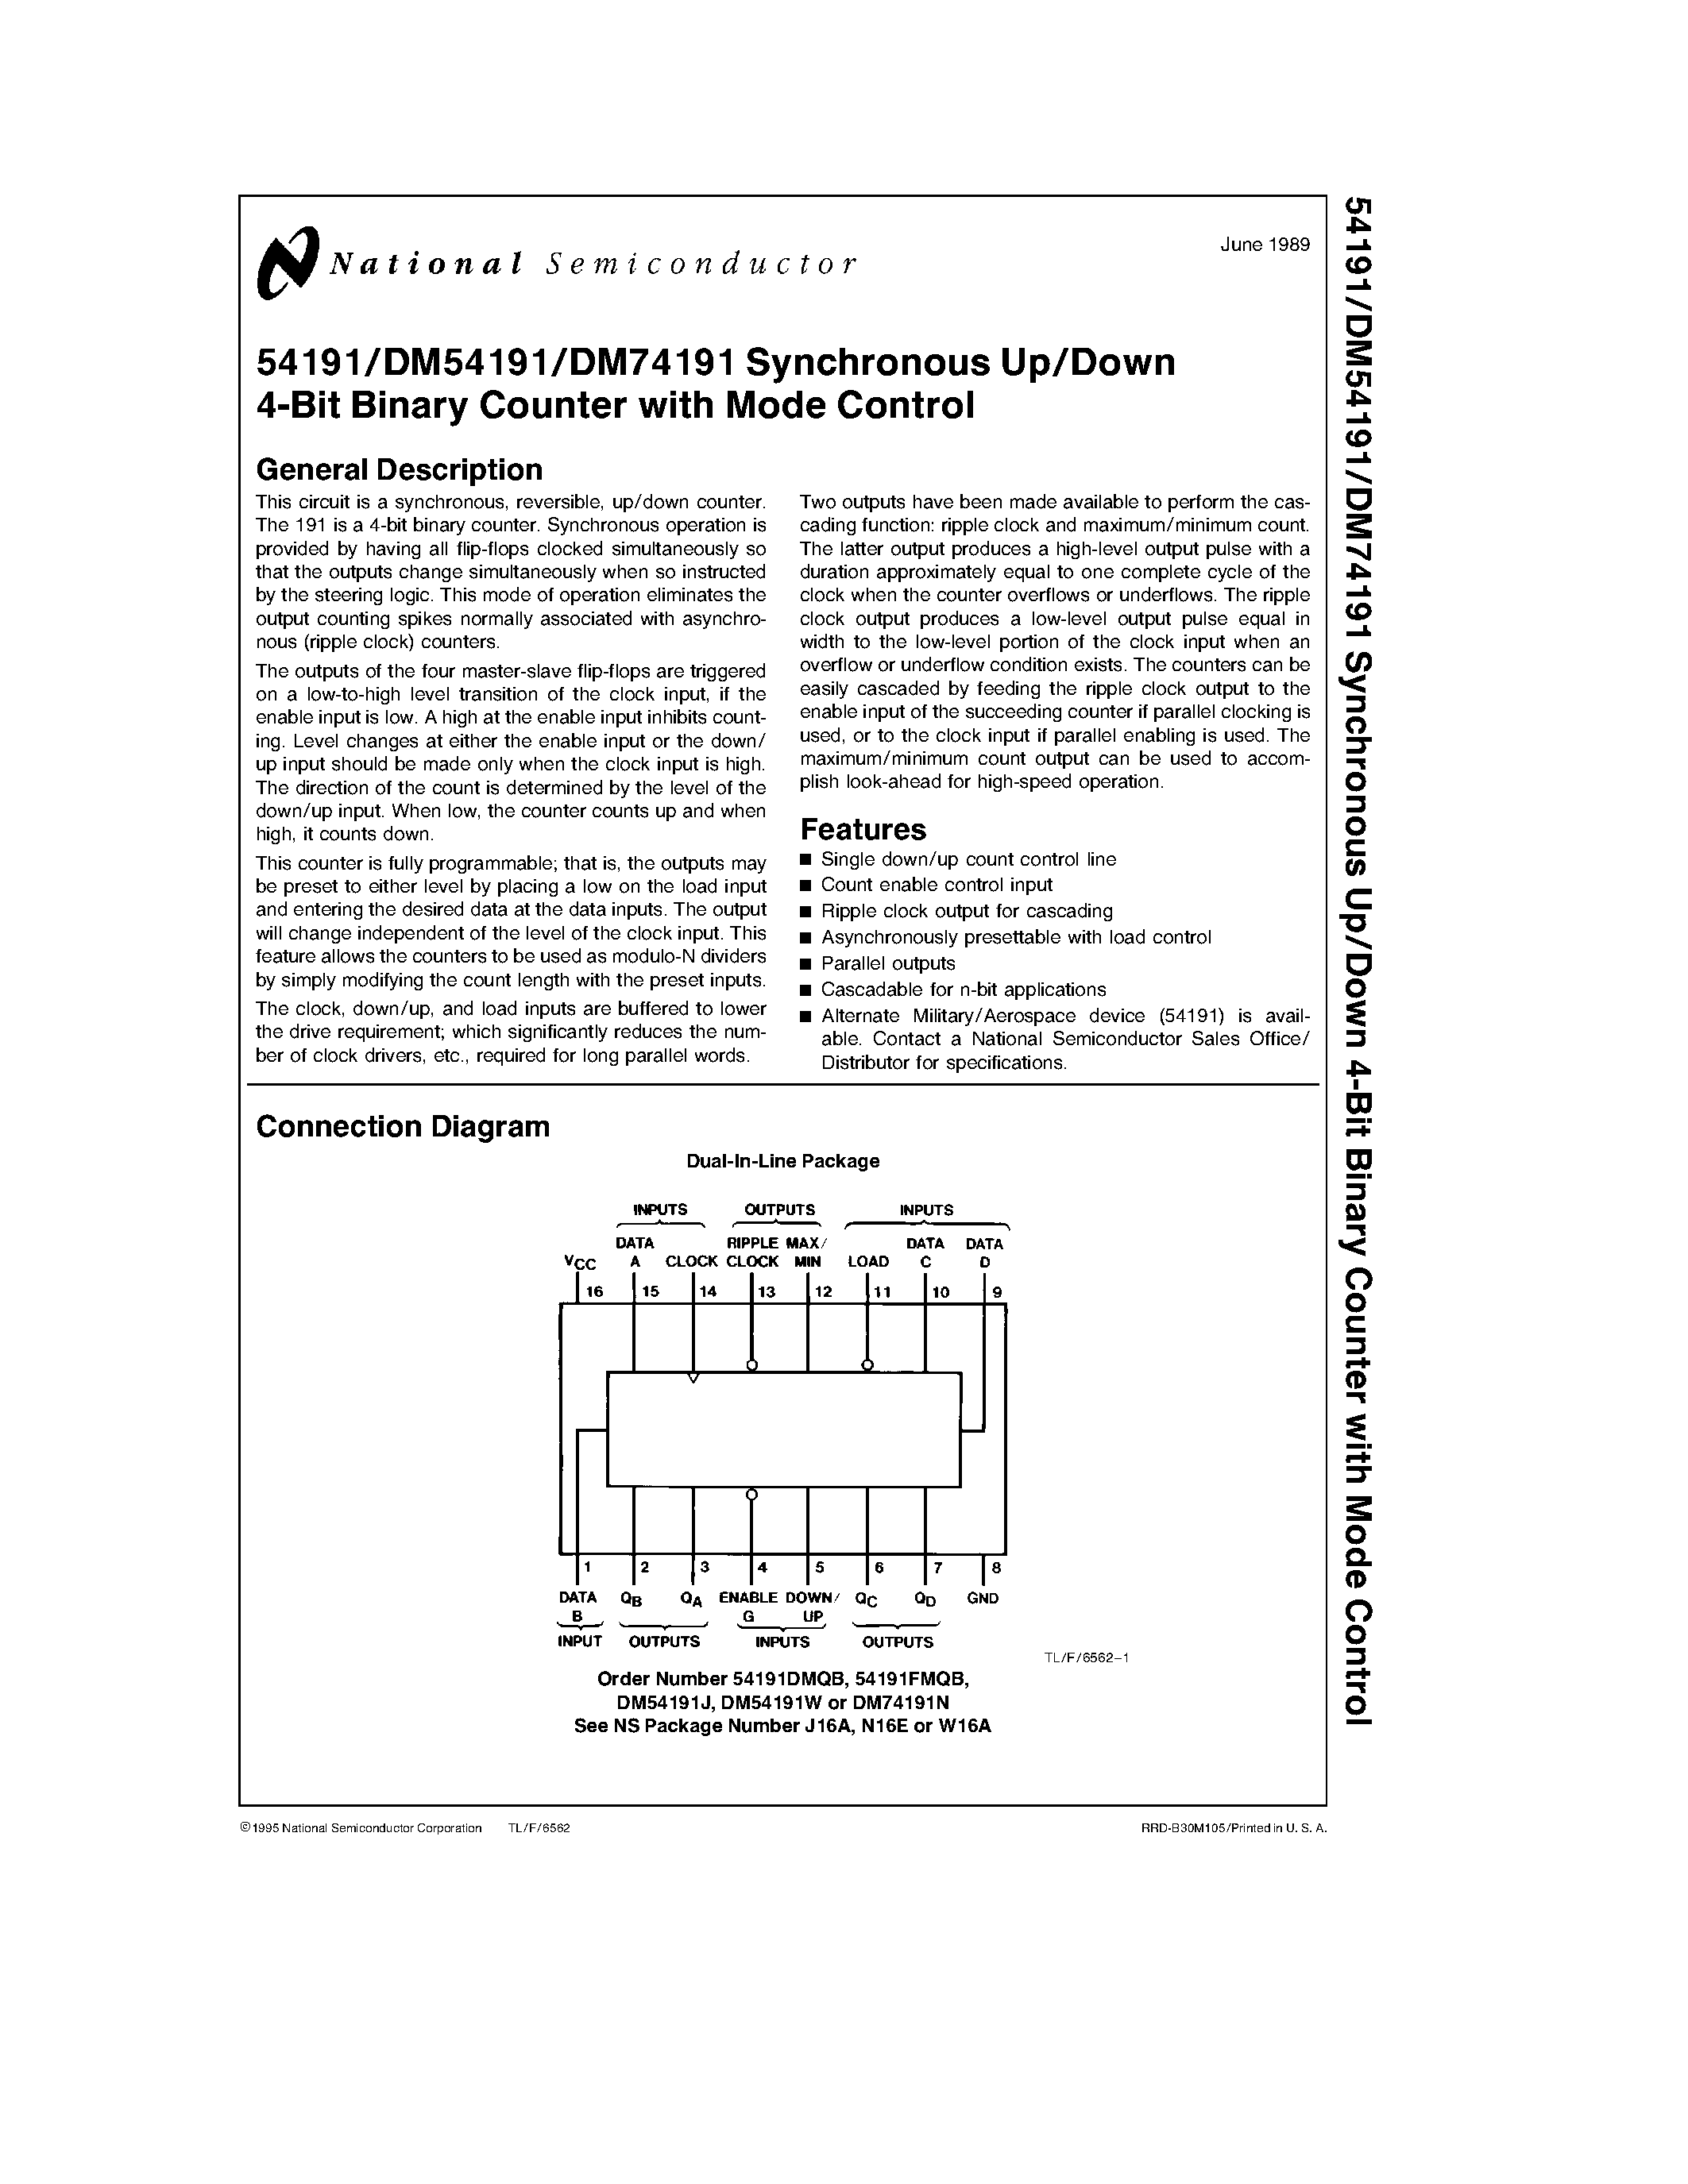 Datasheet 74191 - Synchronous Up/Down 4-Bit Binary Counter with Mode Control page 1